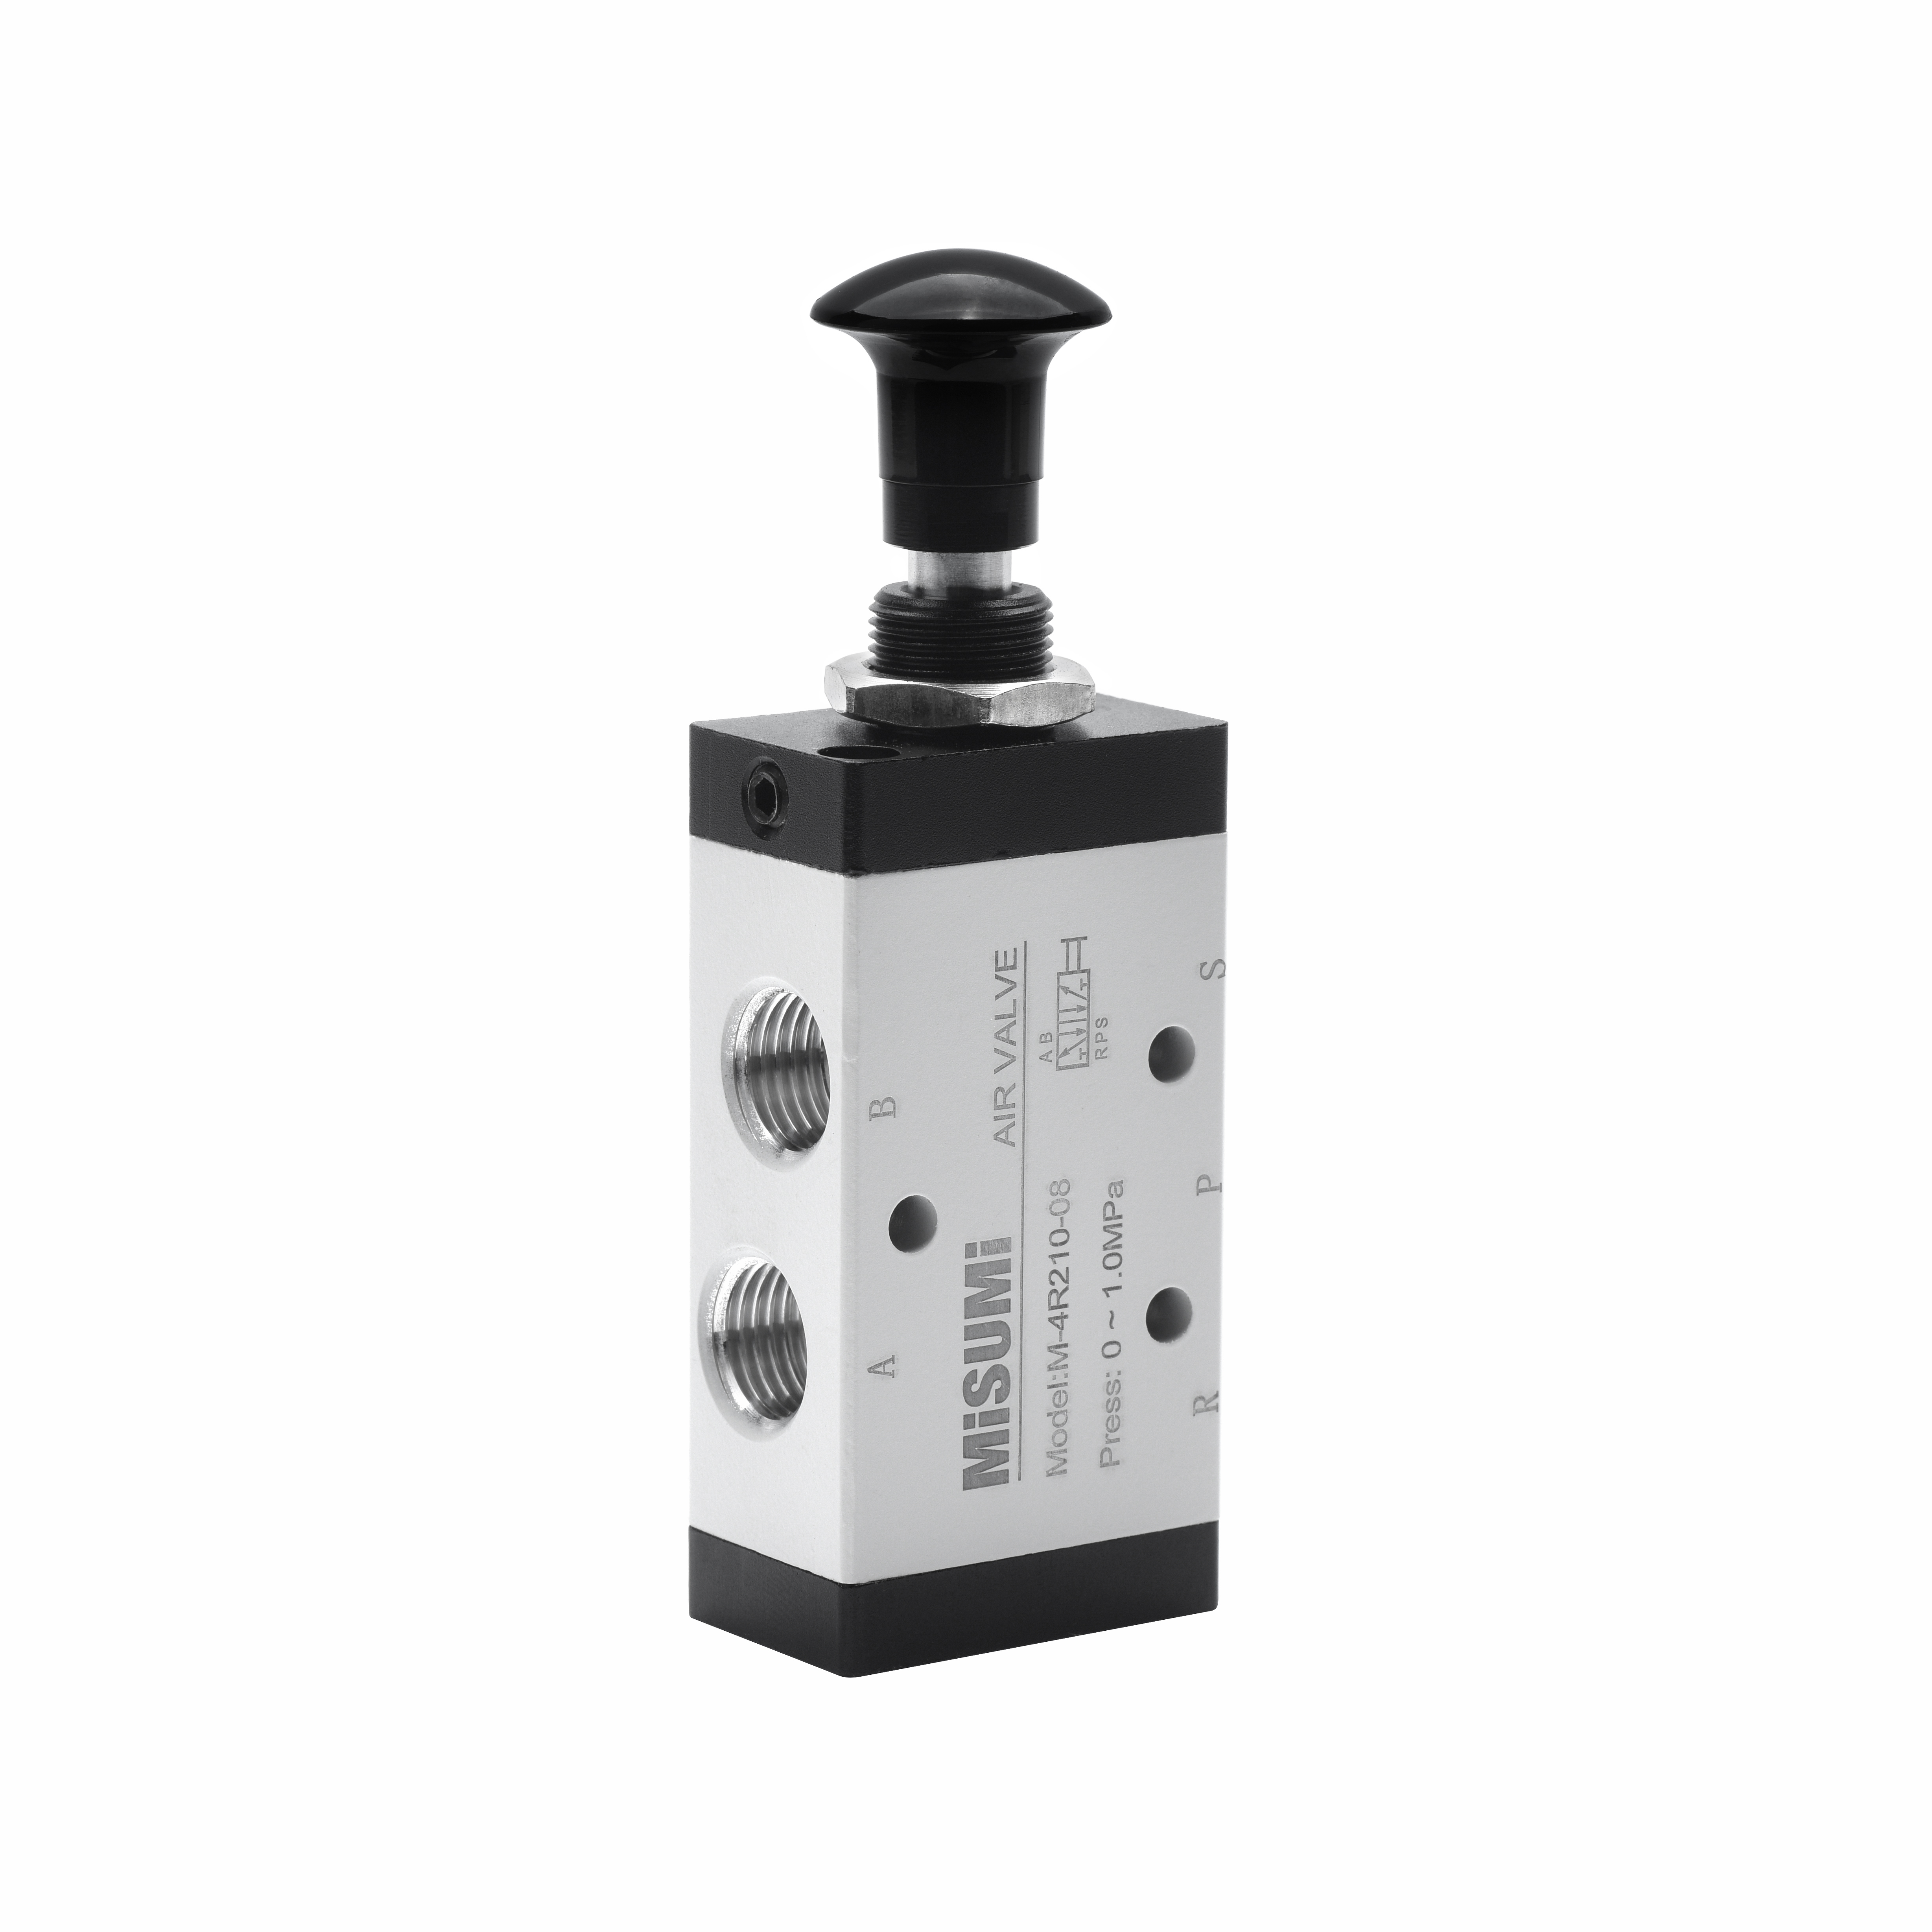 Hand Switching Valves With Pull Knob (E-MVP210-01-S)